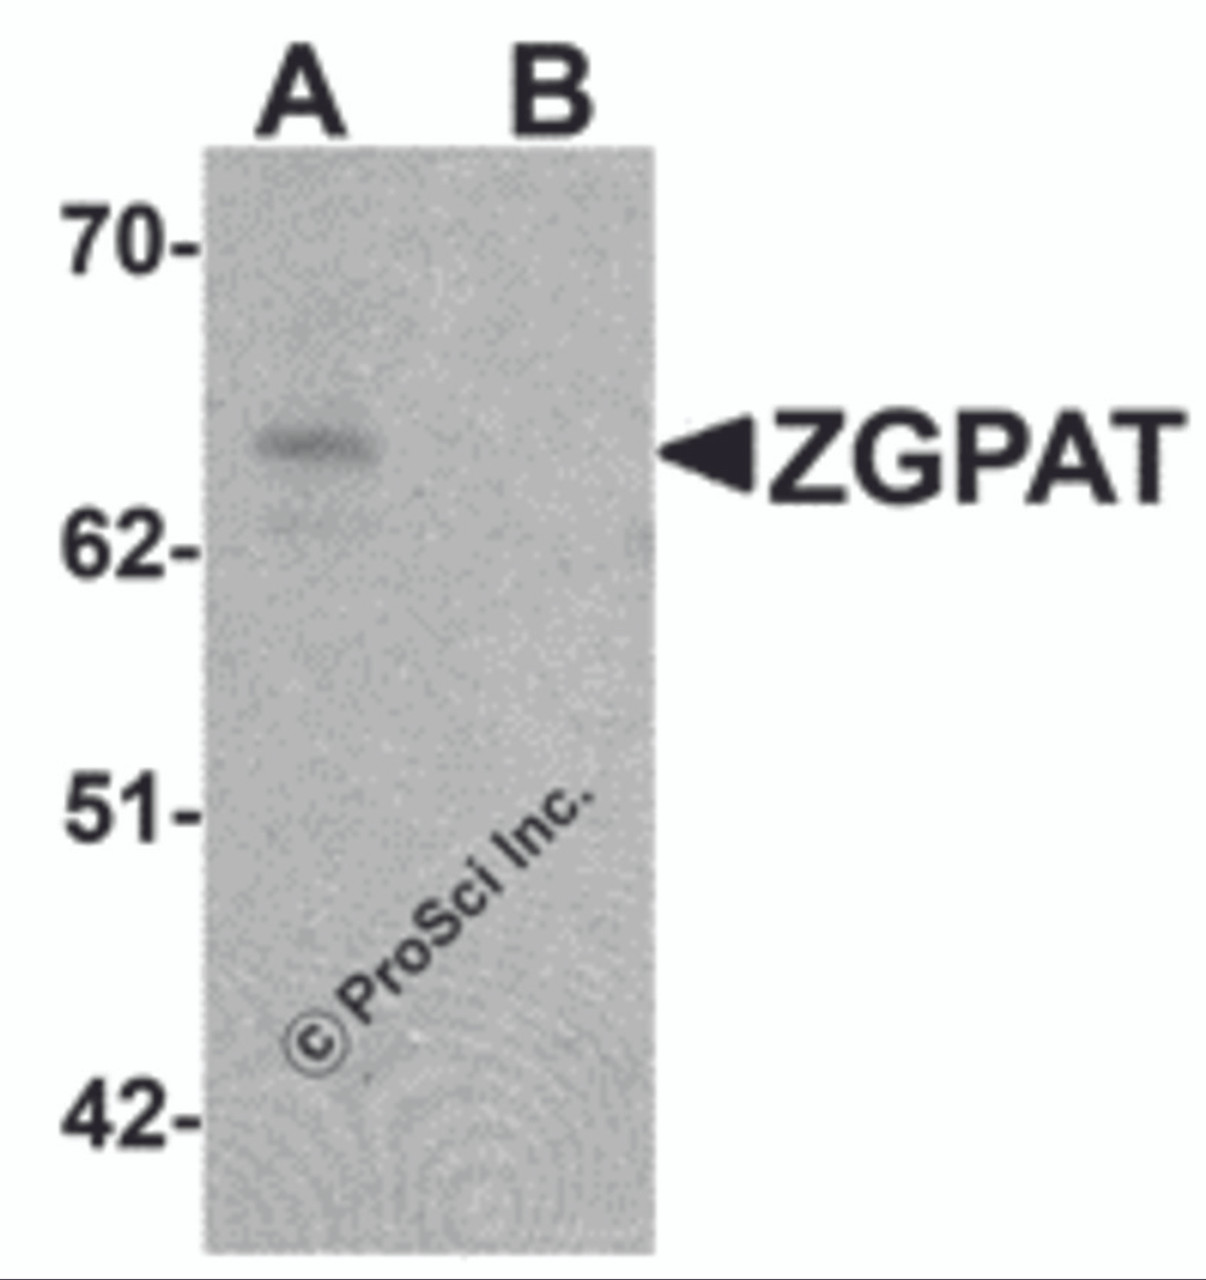 Western blot analysis of ZGPAT in SK-N-SH cell lysate with ZGPAT antibody at 1 &#956;g/mL in (A) the absence and (B) the presence of blocking peptide.